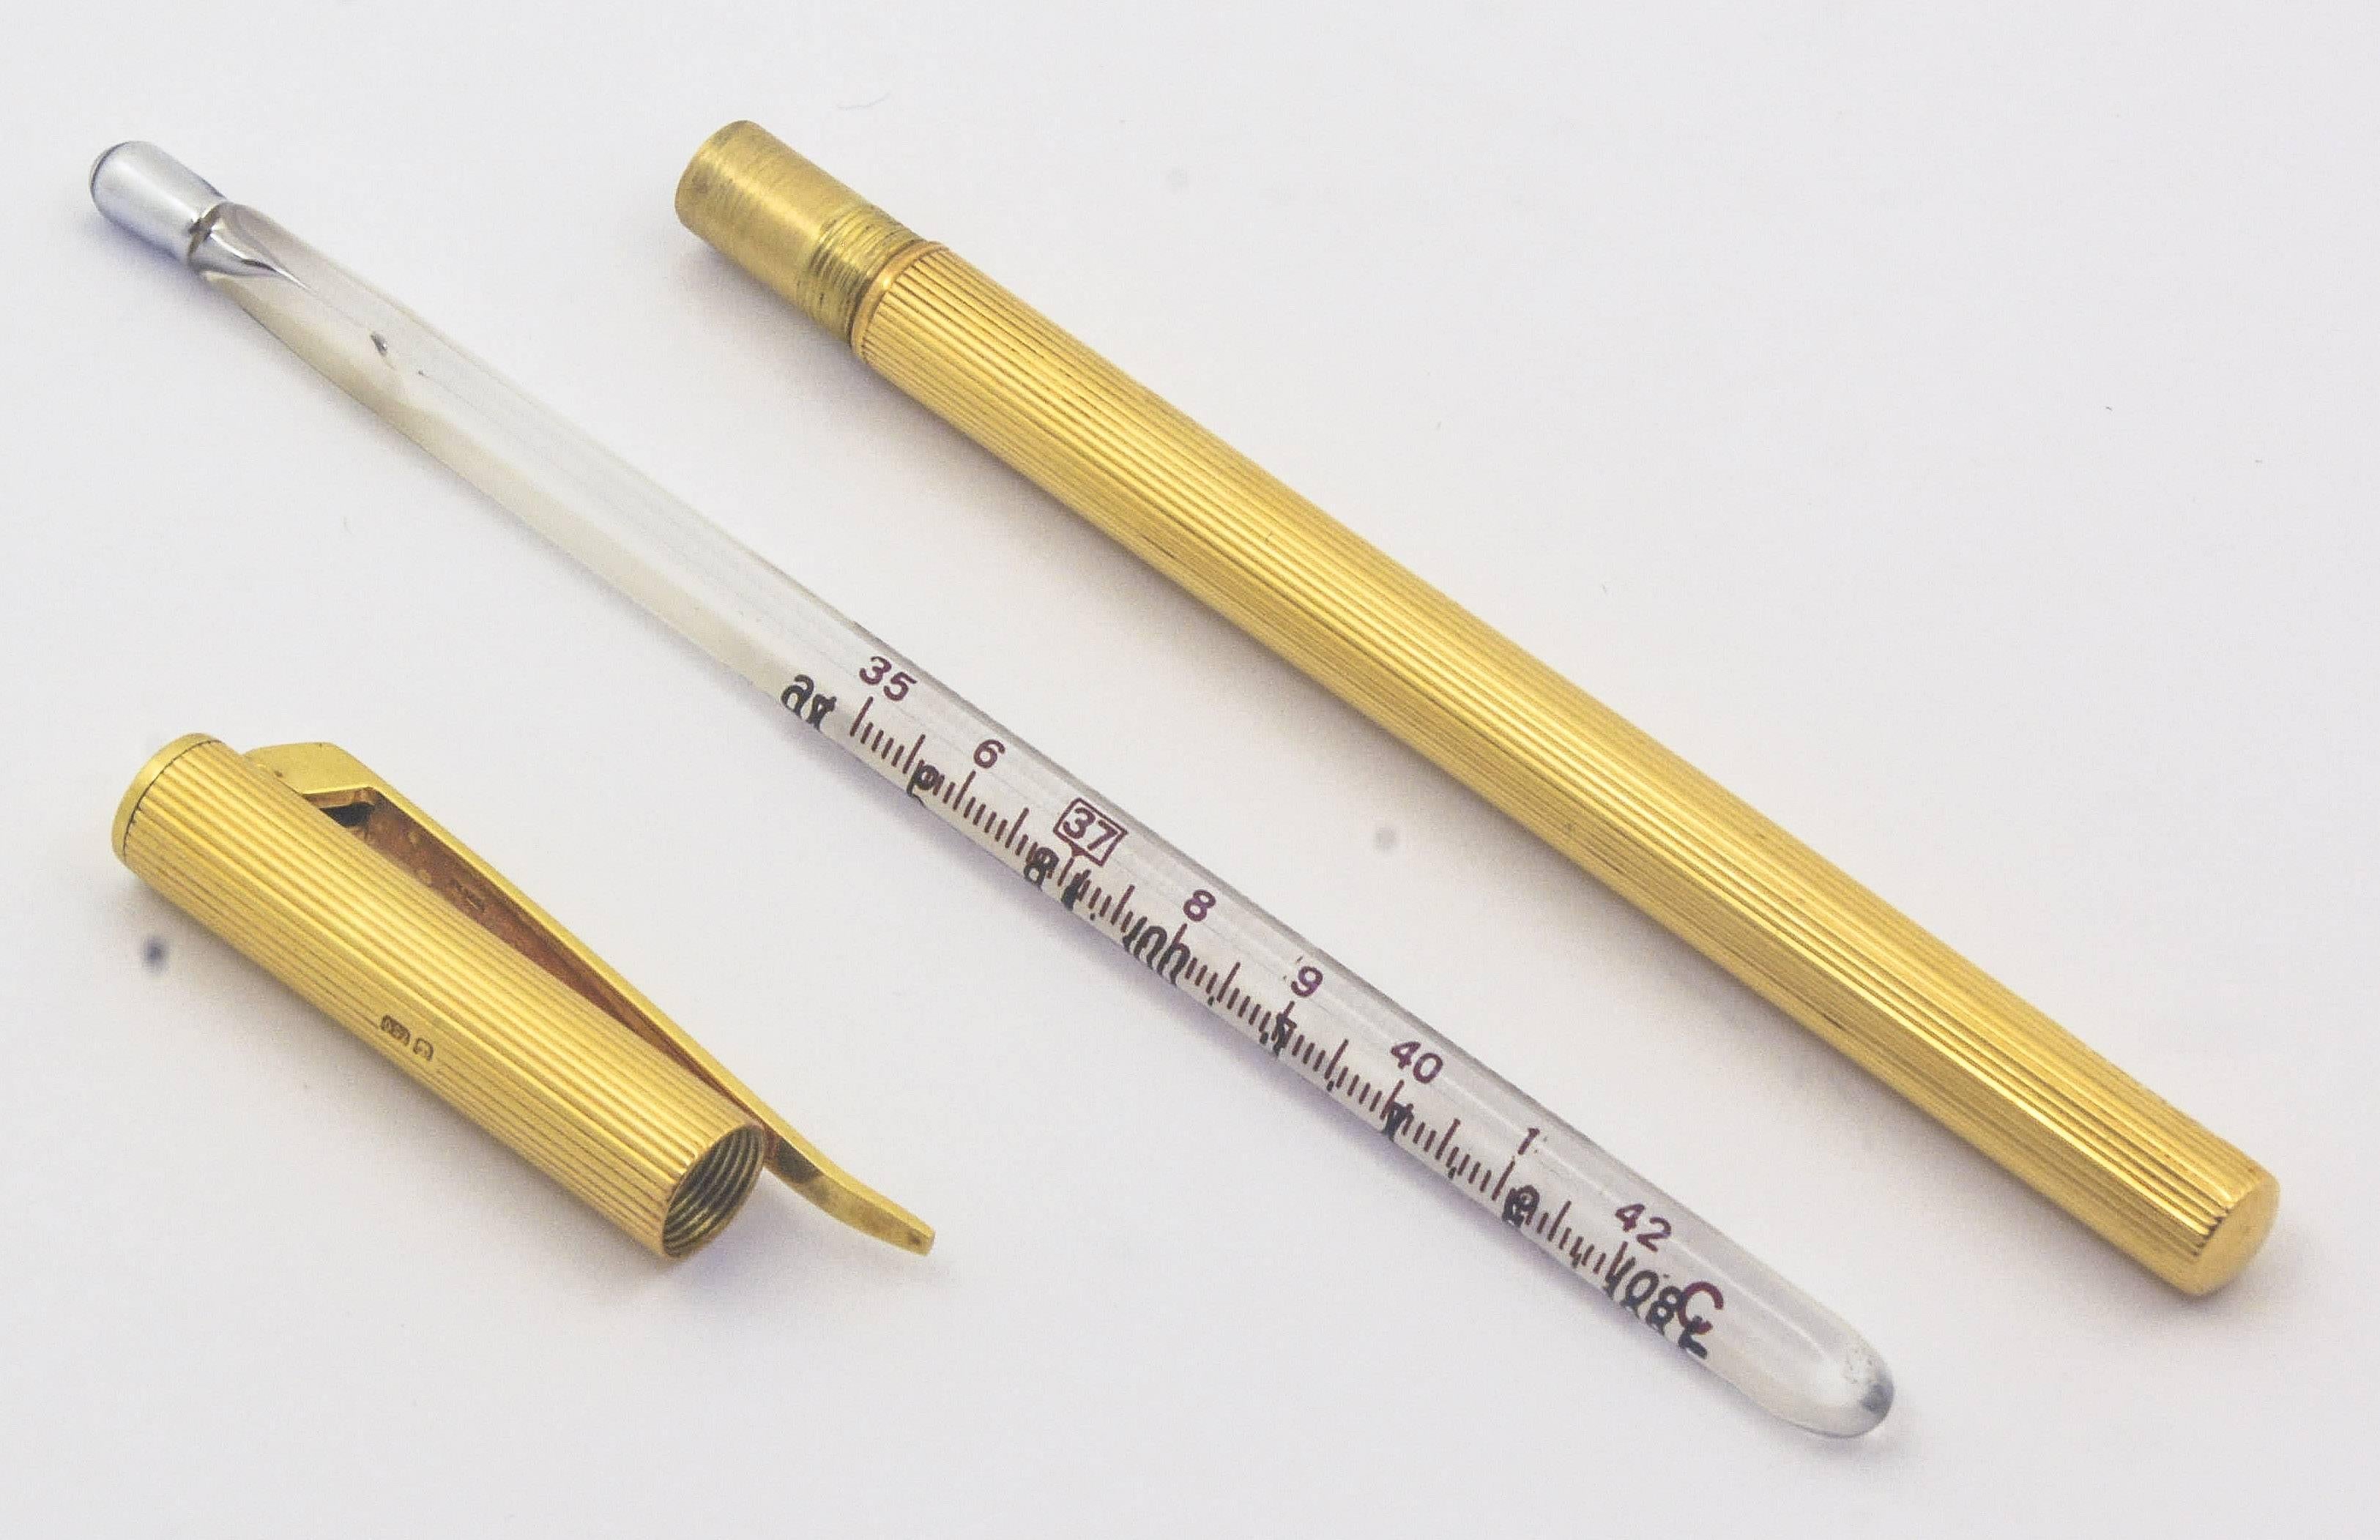 Sure to be an exciting conversation piece, this 18kt yellow gold thermometer case is fashioned with a pocket clip and artistic ribbing around the barrel. It comes with a mid-twentieth century style thermometer and measures 4.30in long and 6.4mm in